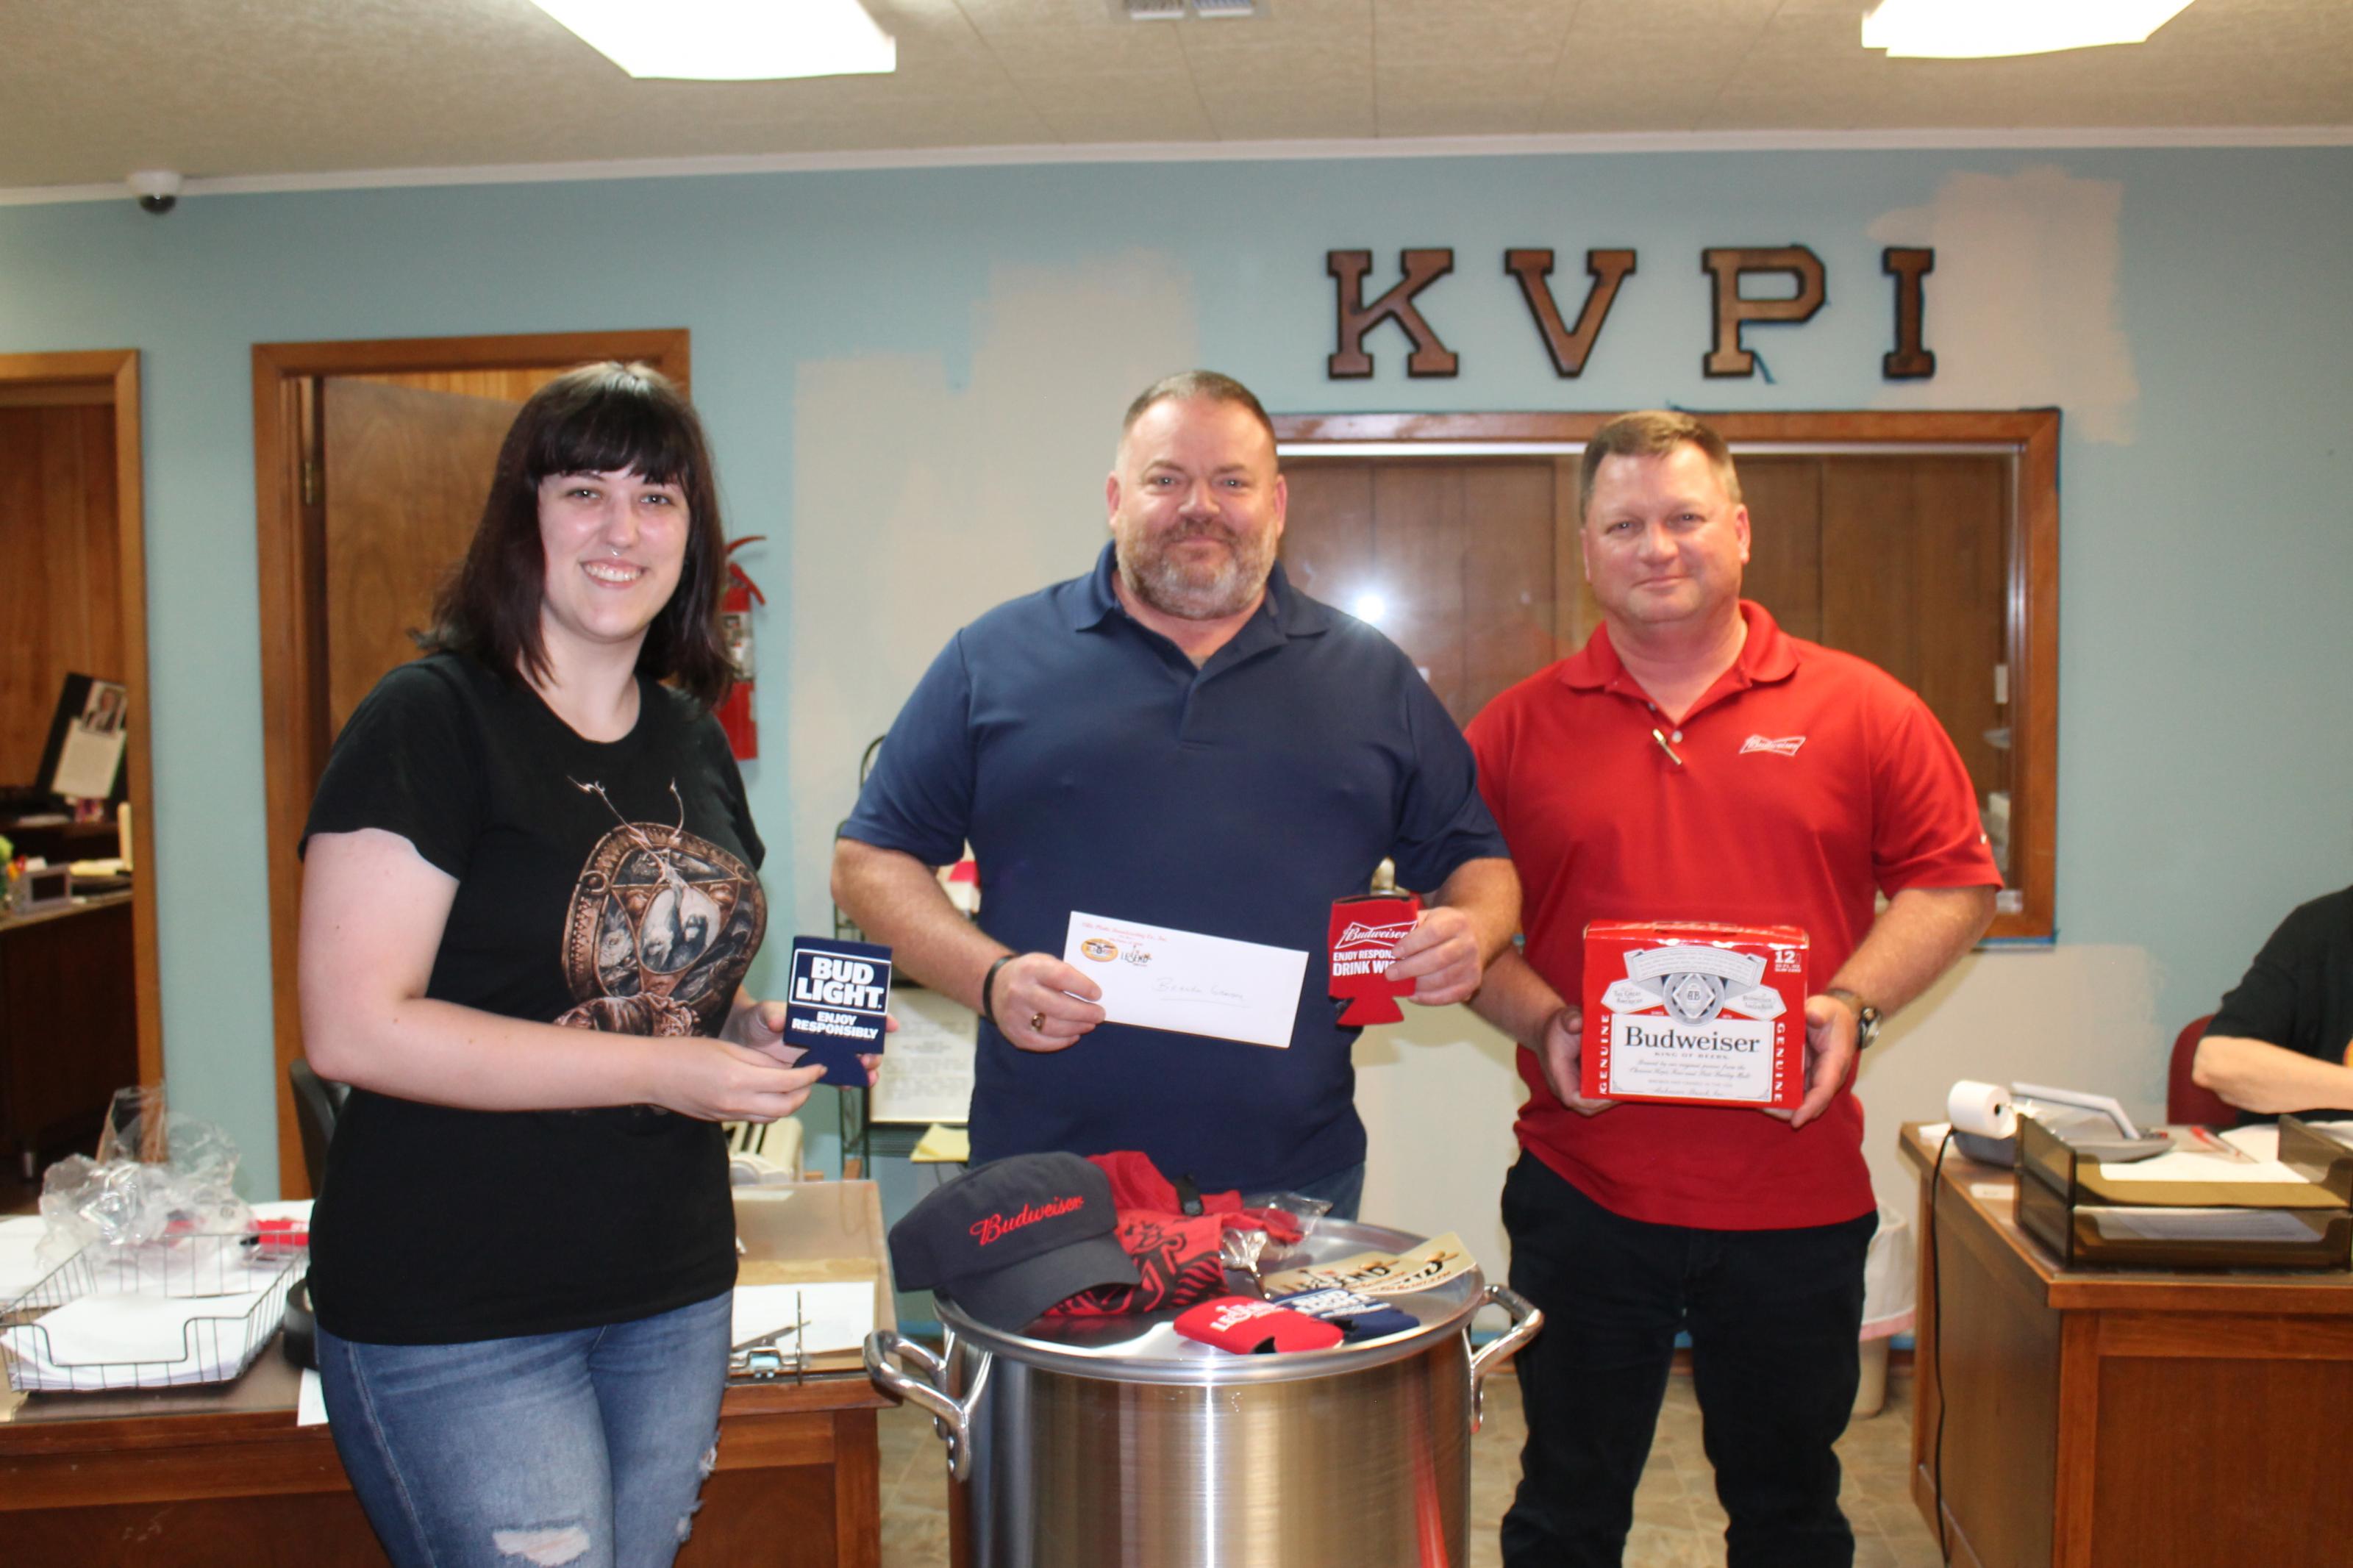 Grand Prize Winner in our KVPI Bud n Boiling contest